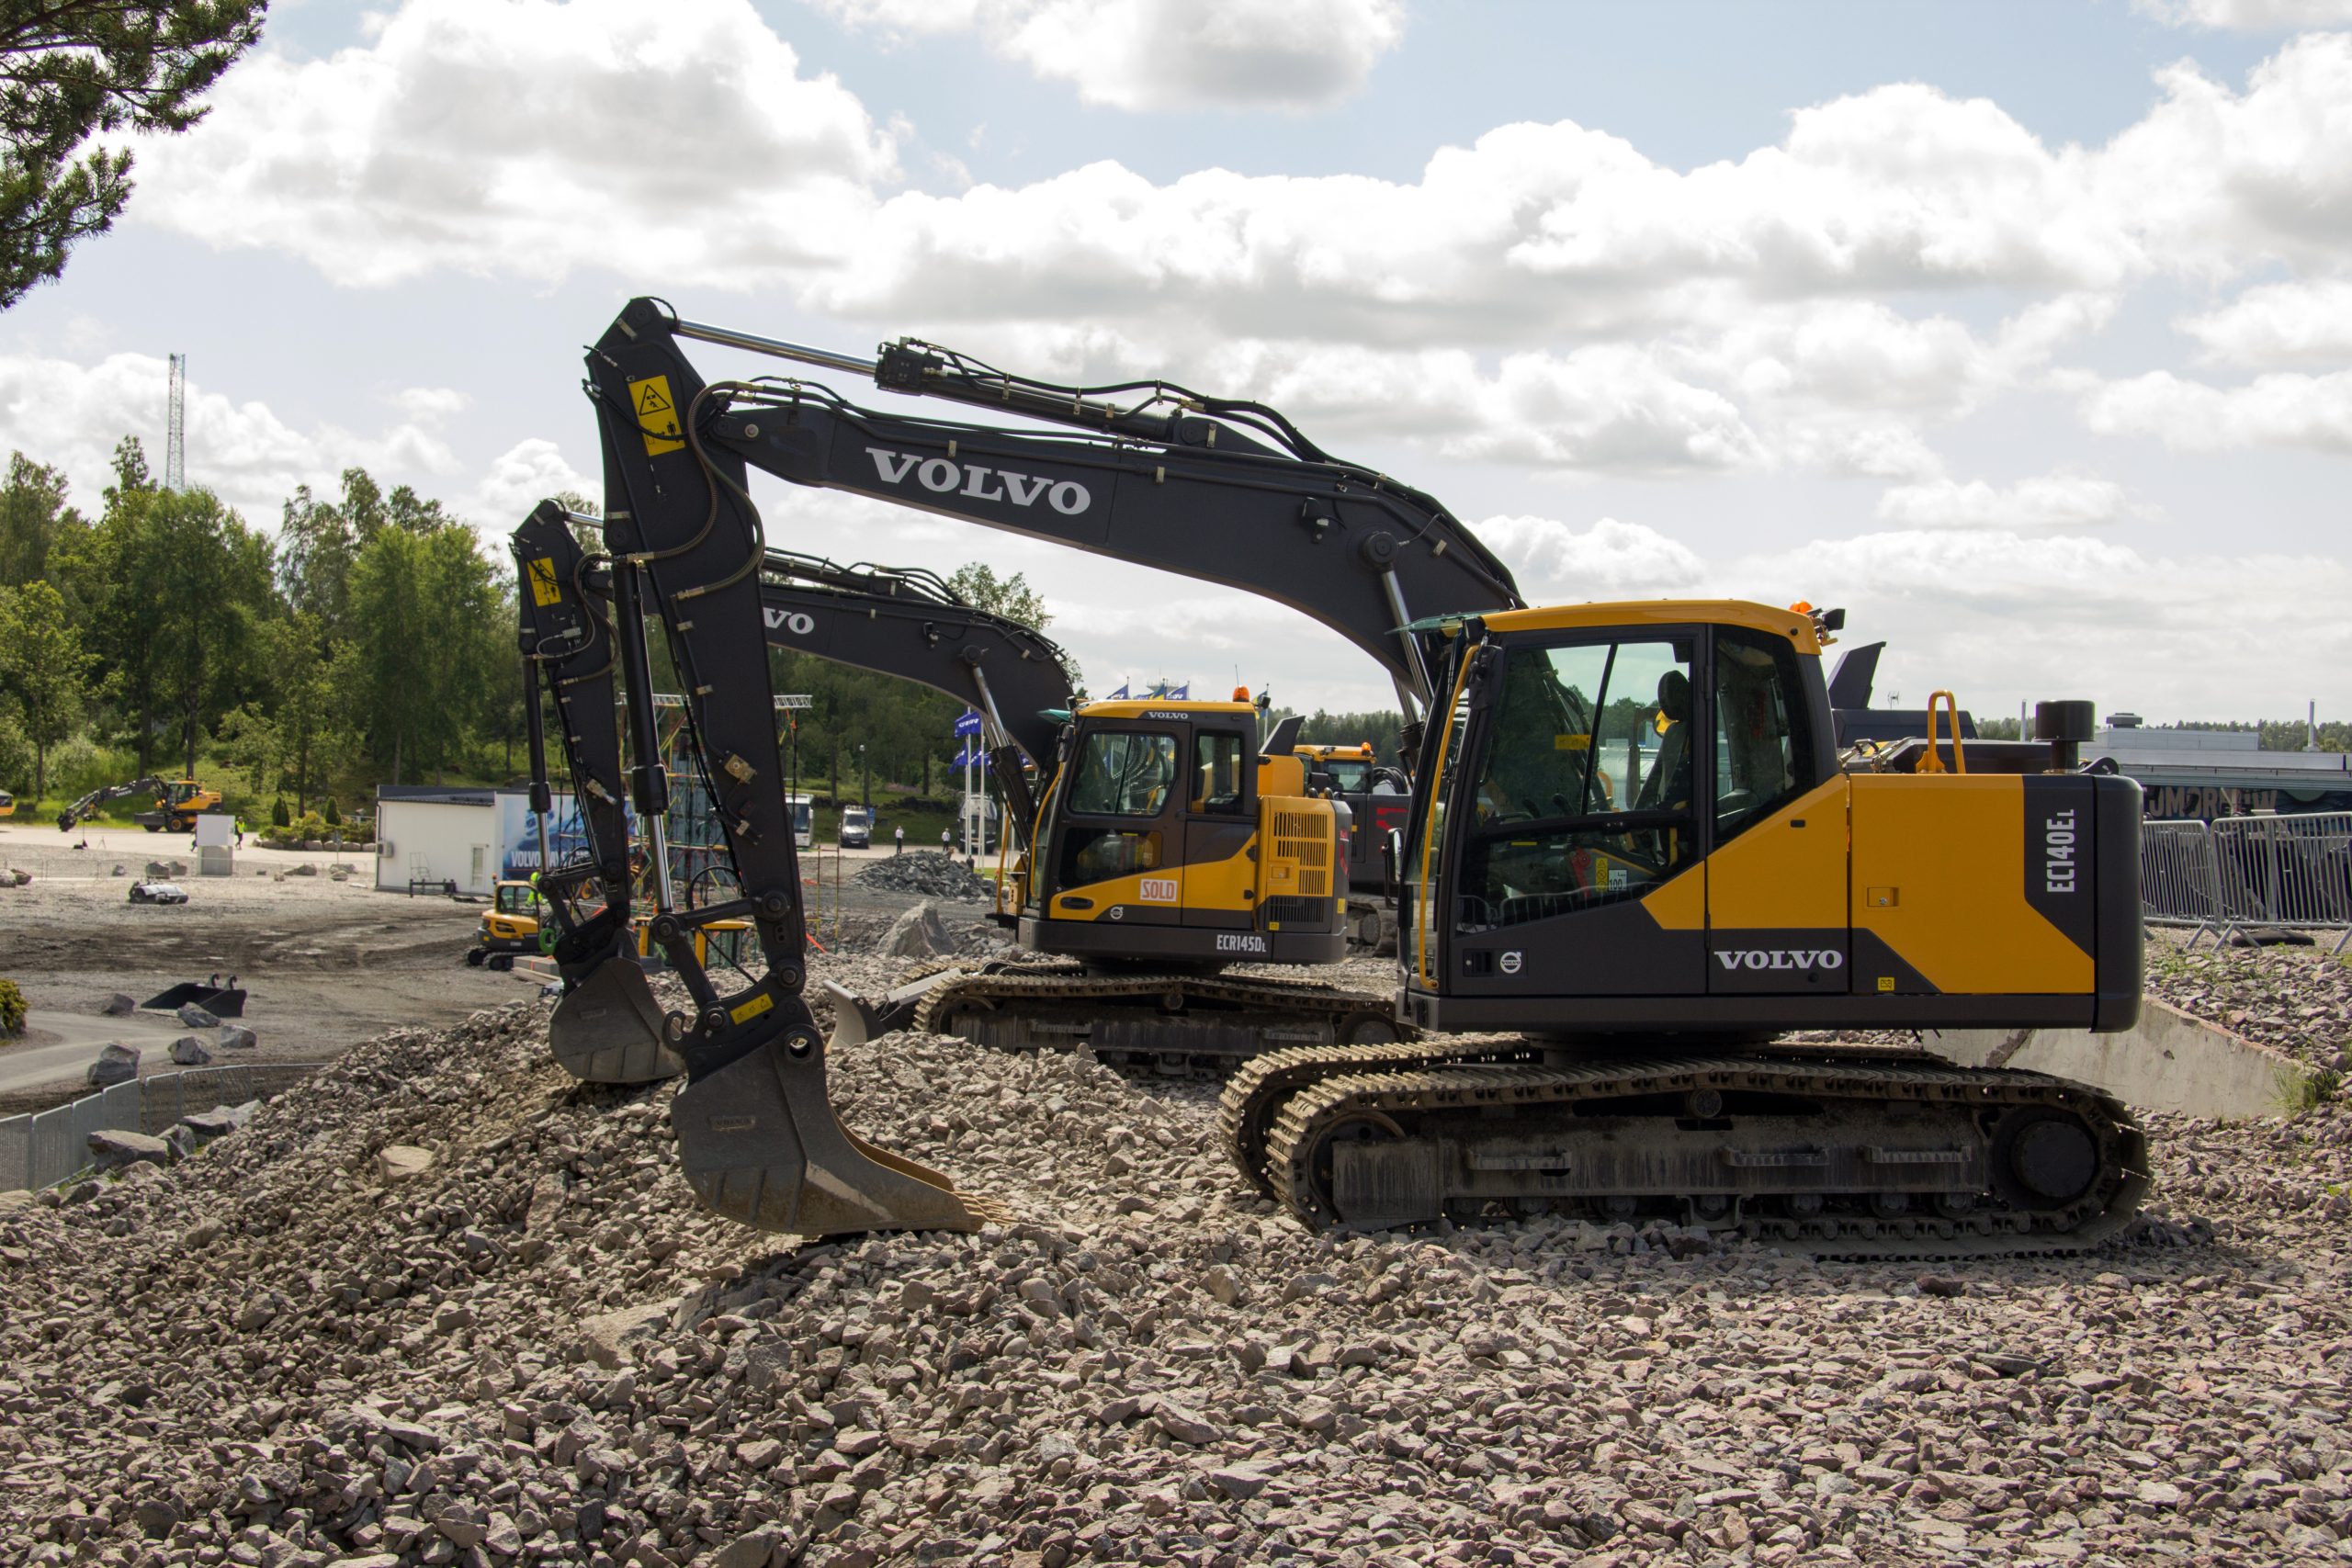 An Image of 2 Volvo Excavators, both available for dry hire from HT Spares